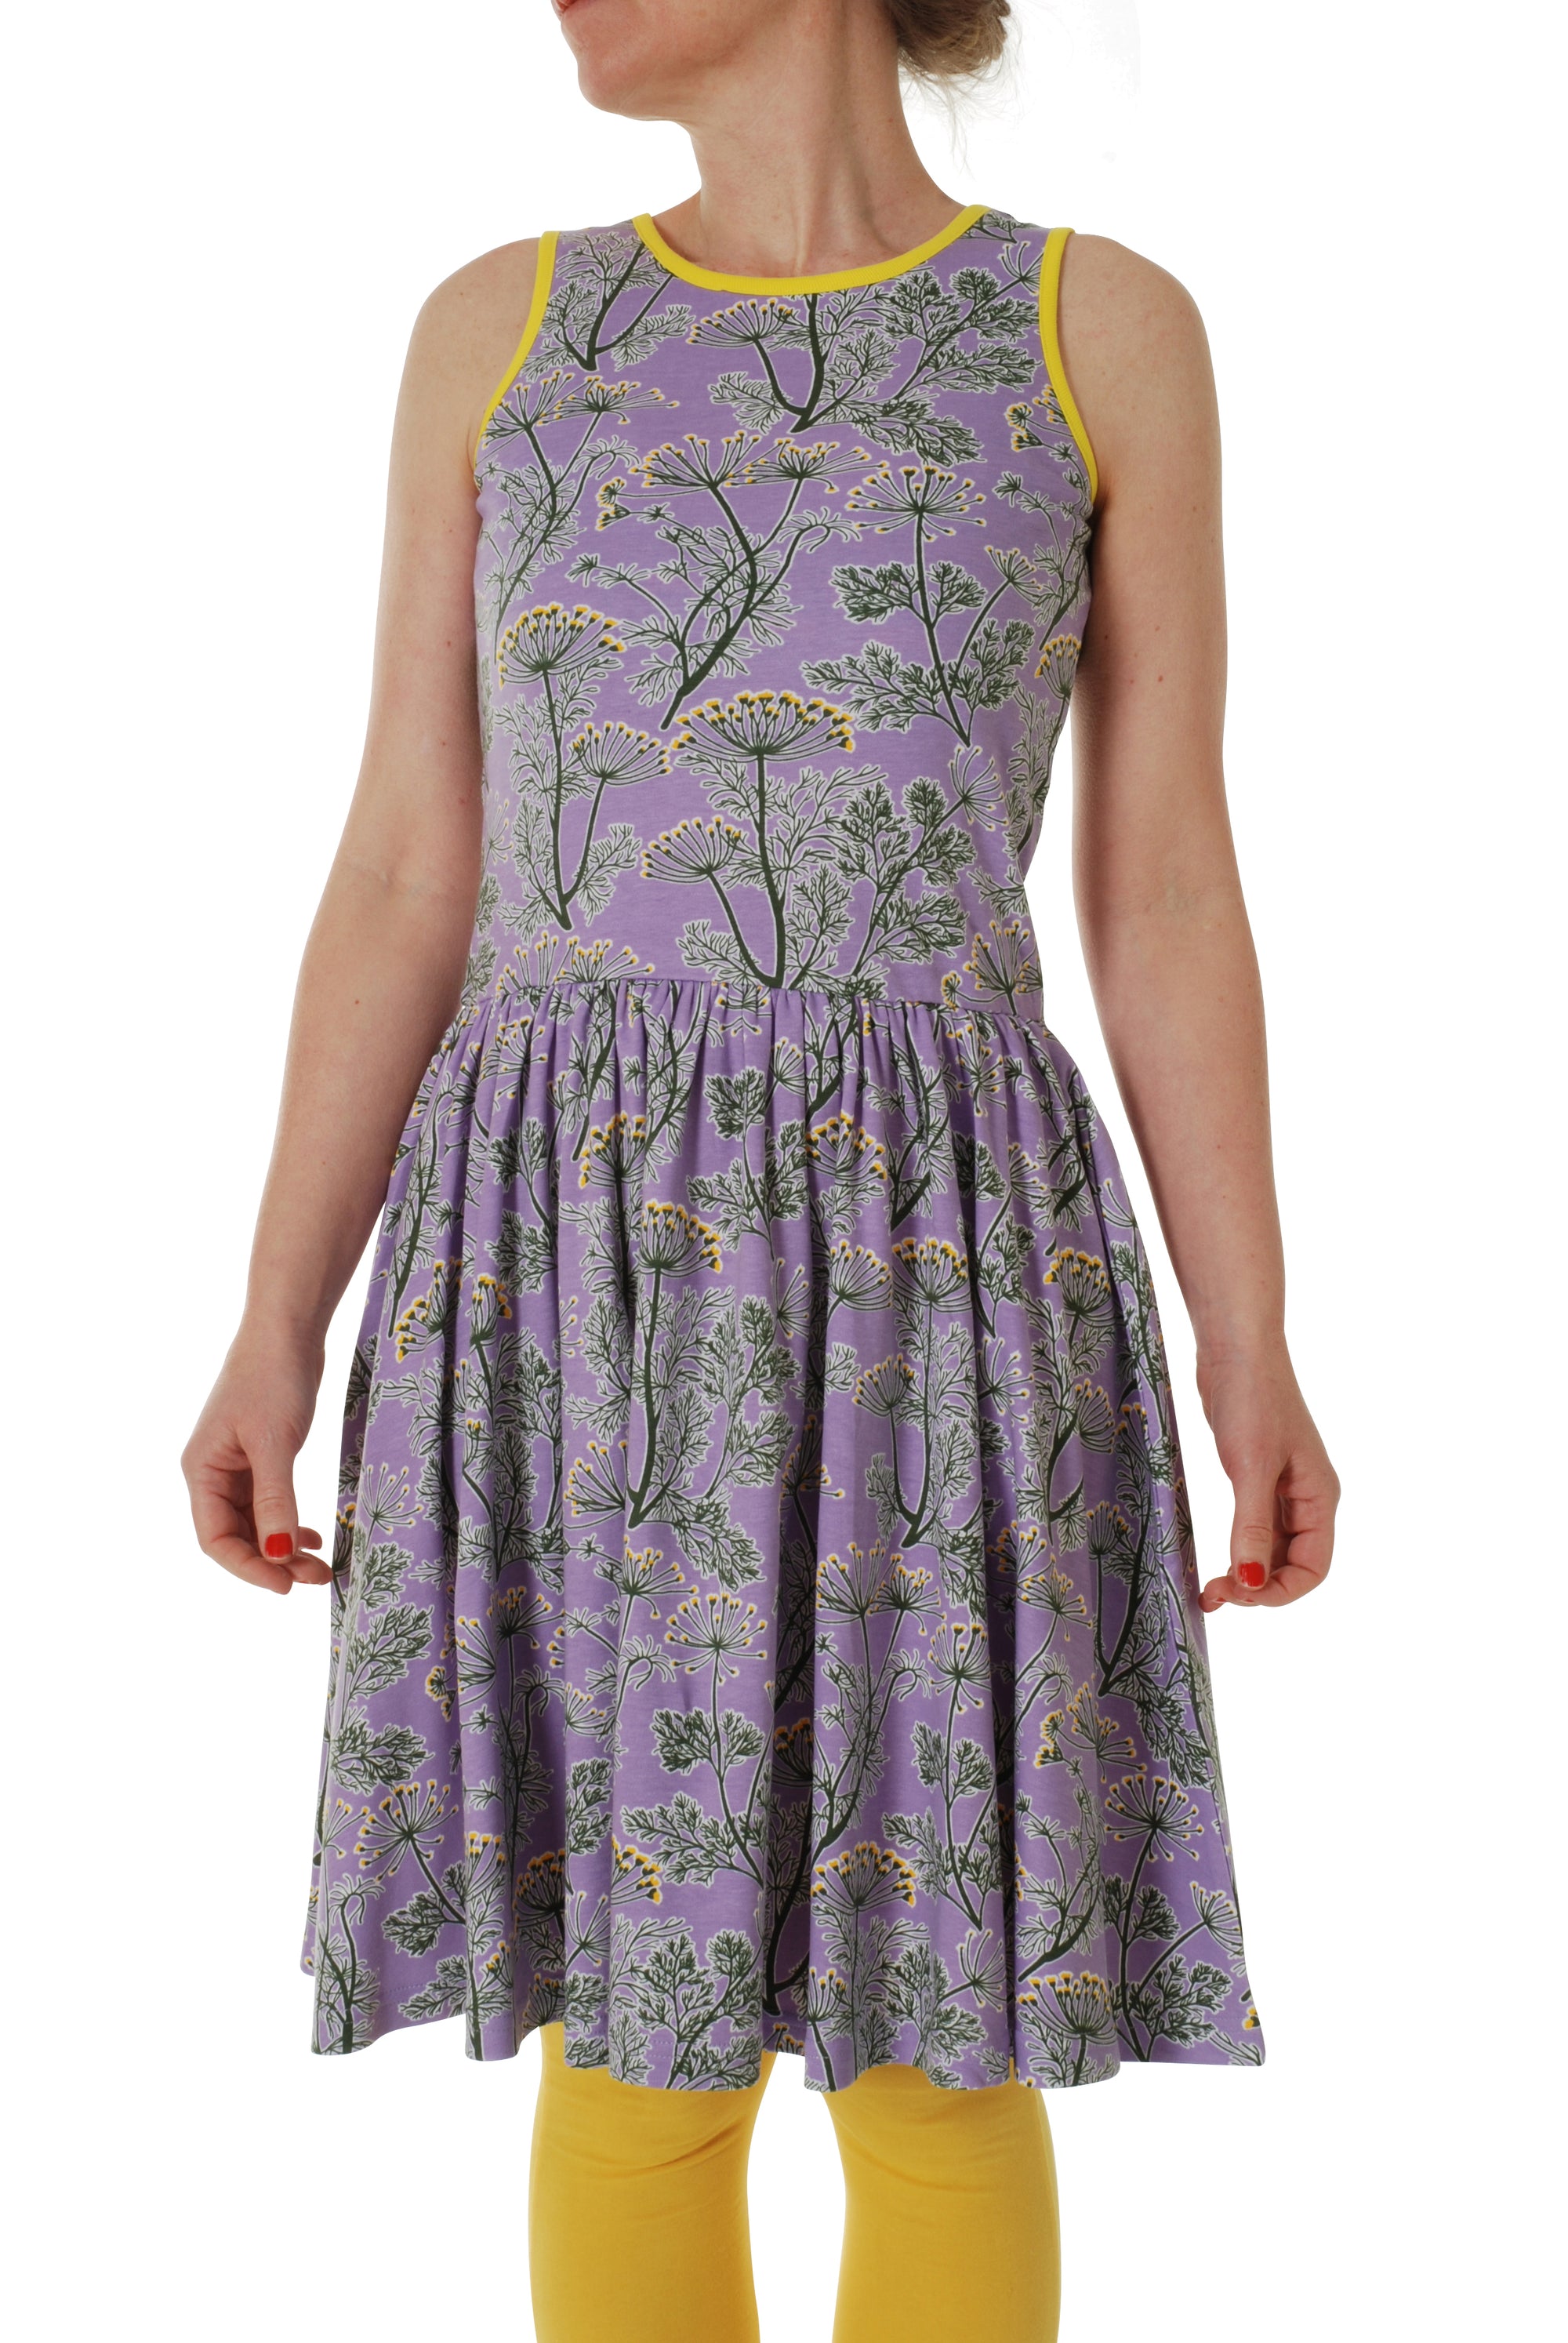 Duns Sweden ADULTS - Sleeveless Gather Dress Dill Violet - Dille Lila